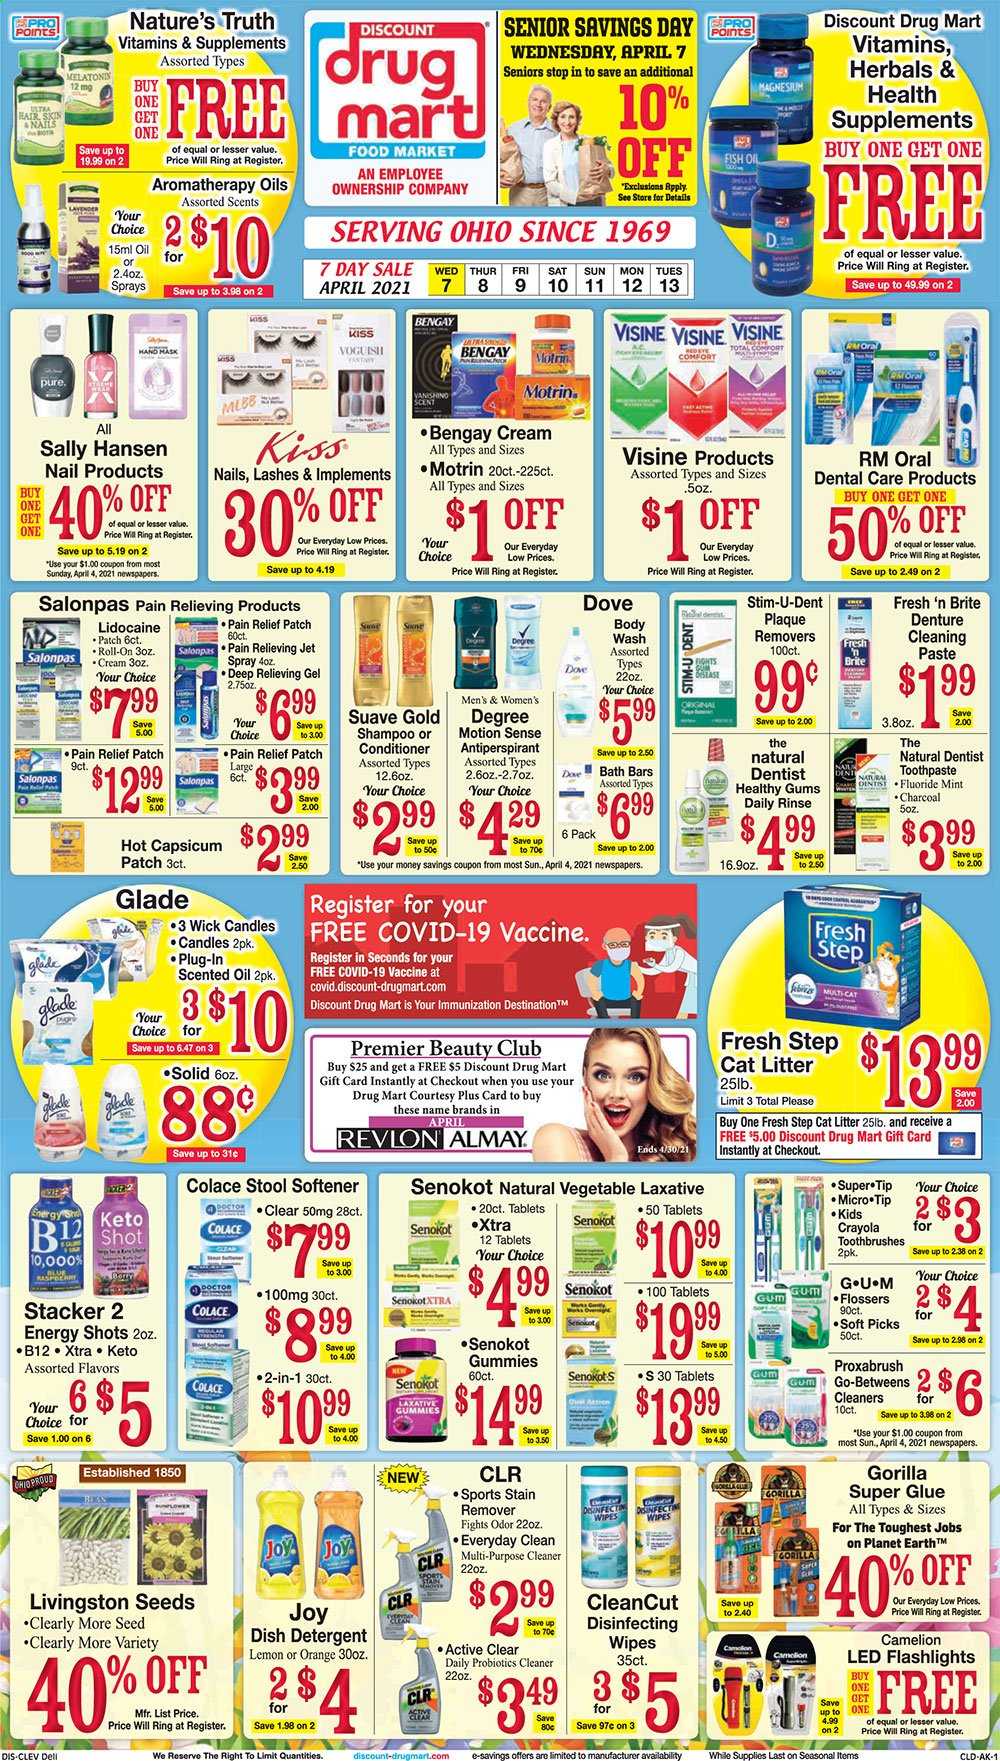 thumbnail - Discount Drug Mart Flyer - 04/07/2021 - 04/13/2021 - Sales products - fish oil, Dove, detergent, wipes, cleaner, stain remover, fabric softener, XTRA, Joy, Jet, body wash, shampoo, Suave, toothpaste, Almay, conditioner, Revlon, Brite, Hask, anti-perspirant, roll-on, Sally Hansen, crayons, glue, candle, Glade, scented oil, aromatherapy oils, cat litter, Fresh Step, plant seeds, pain relief, Nature's Truth, probiotics, Bengay, laxative, health supplement, Motrin, capsicum. Page 1.